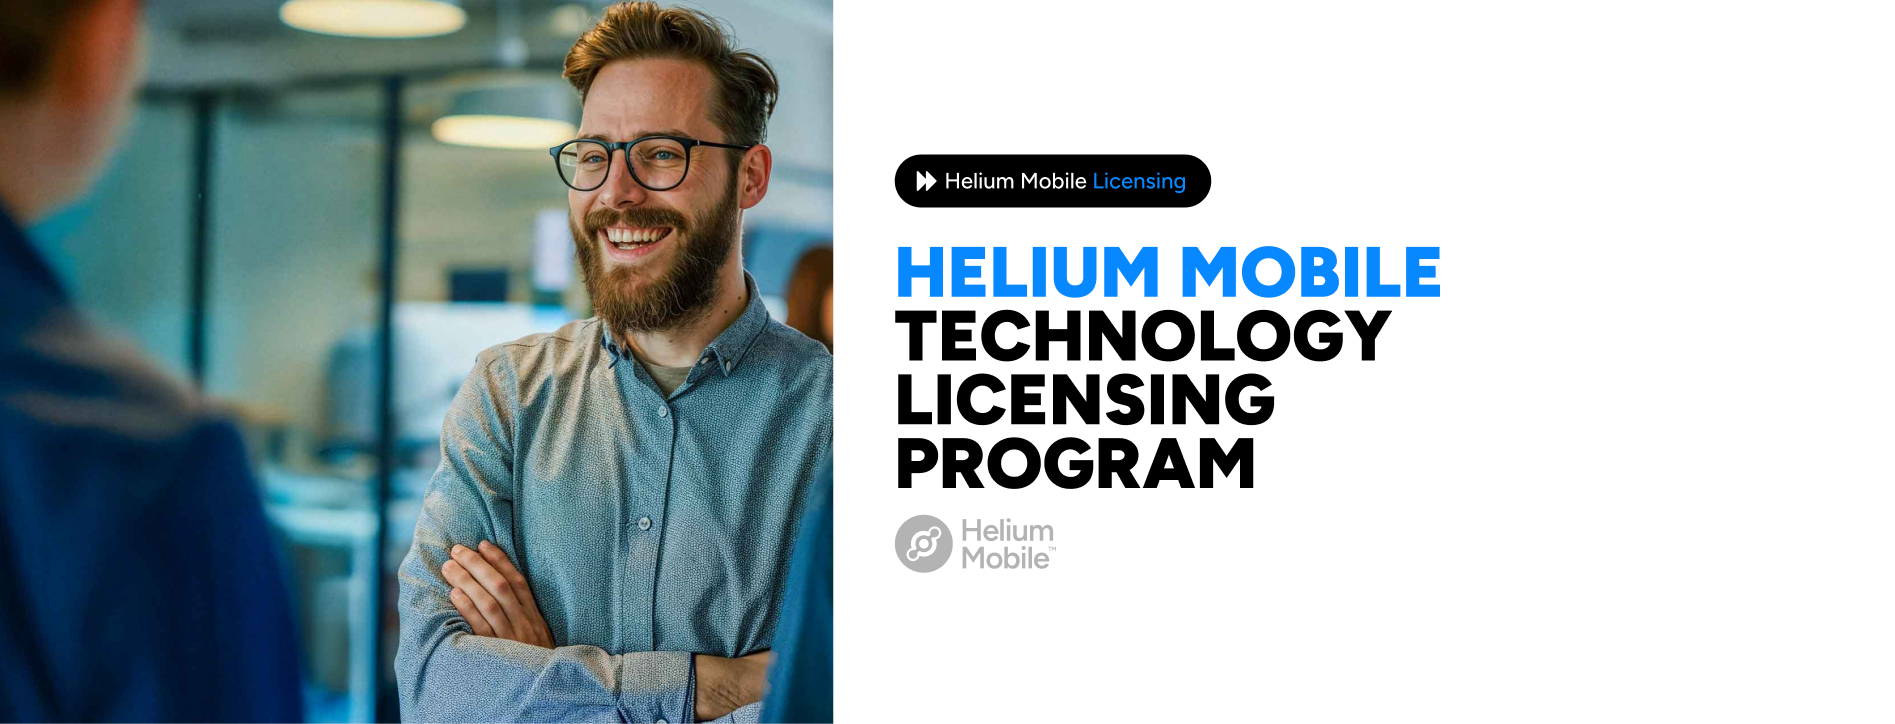 Helium Mobile Launches Tech Stack Licensing Program for Device Manufacturers